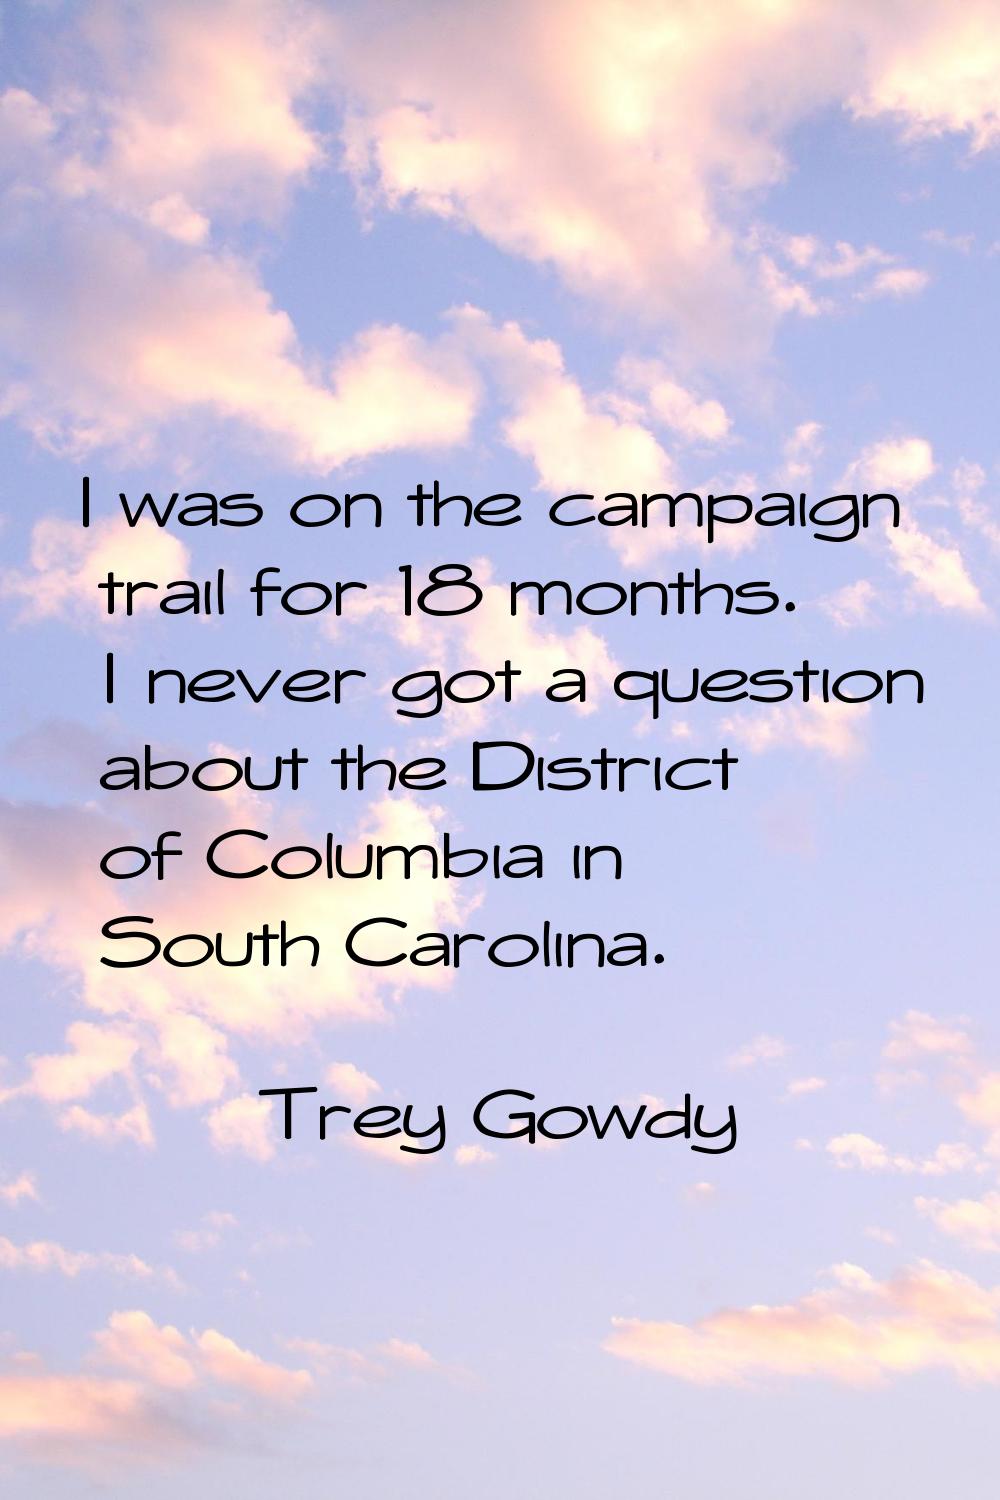 I was on the campaign trail for 18 months. I never got a question about the District of Columbia in